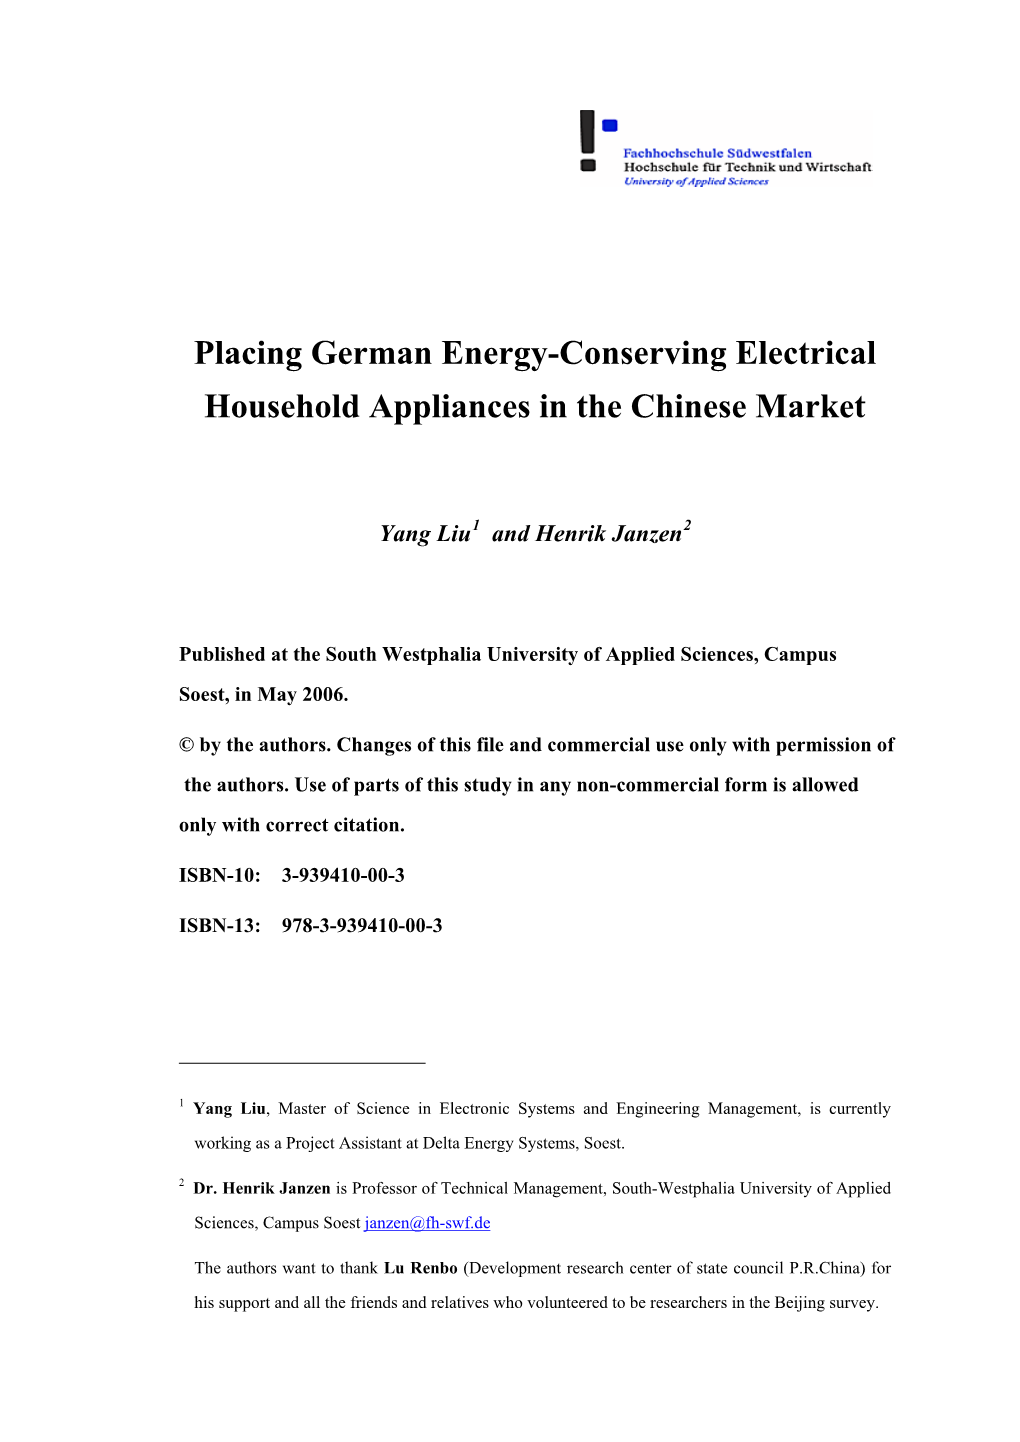 Placing German Energy-Conserving Electrical Household Appliances in the Chinese Market